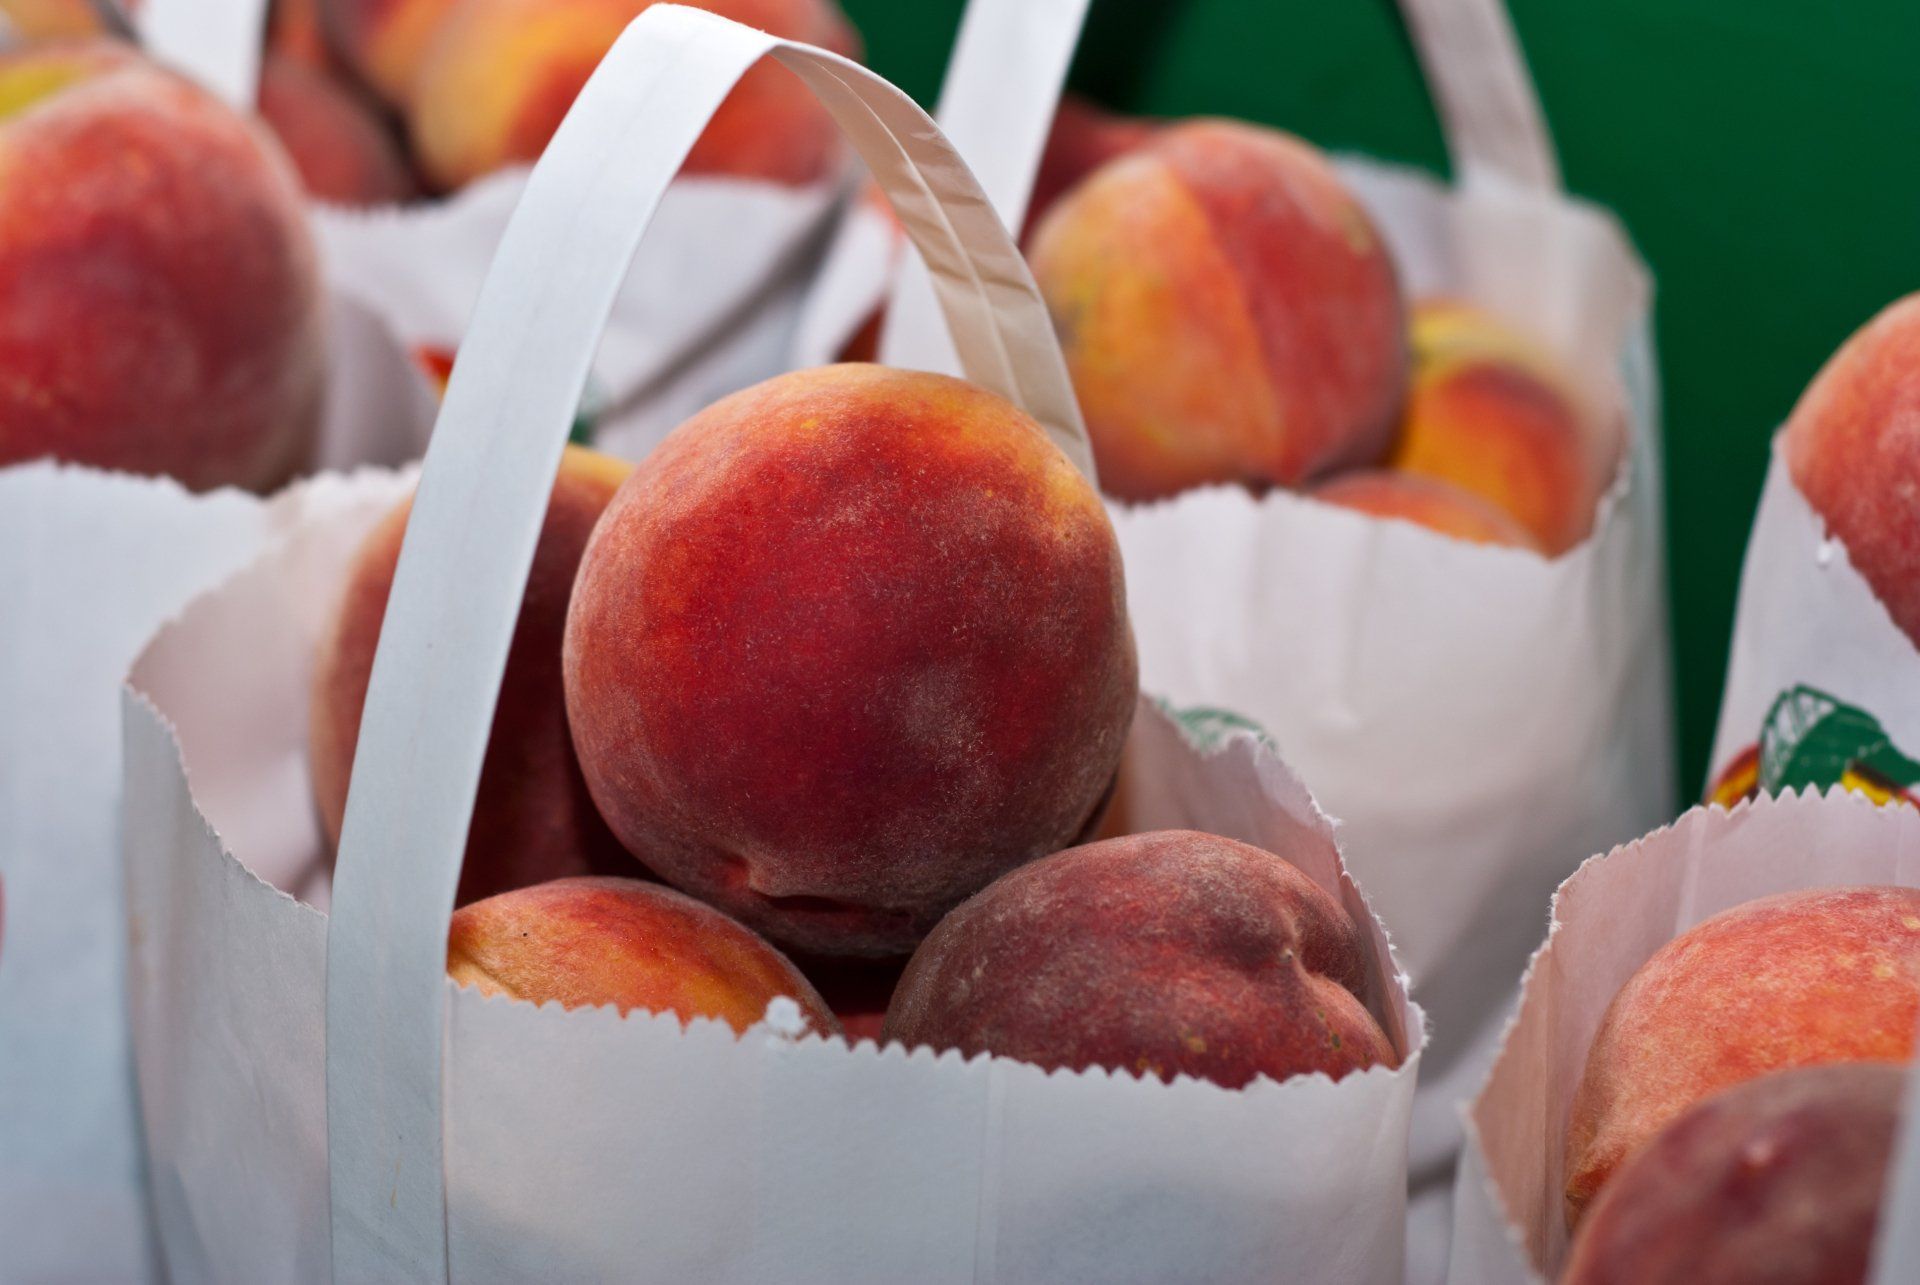 A bunch of peaches in white bags with handles